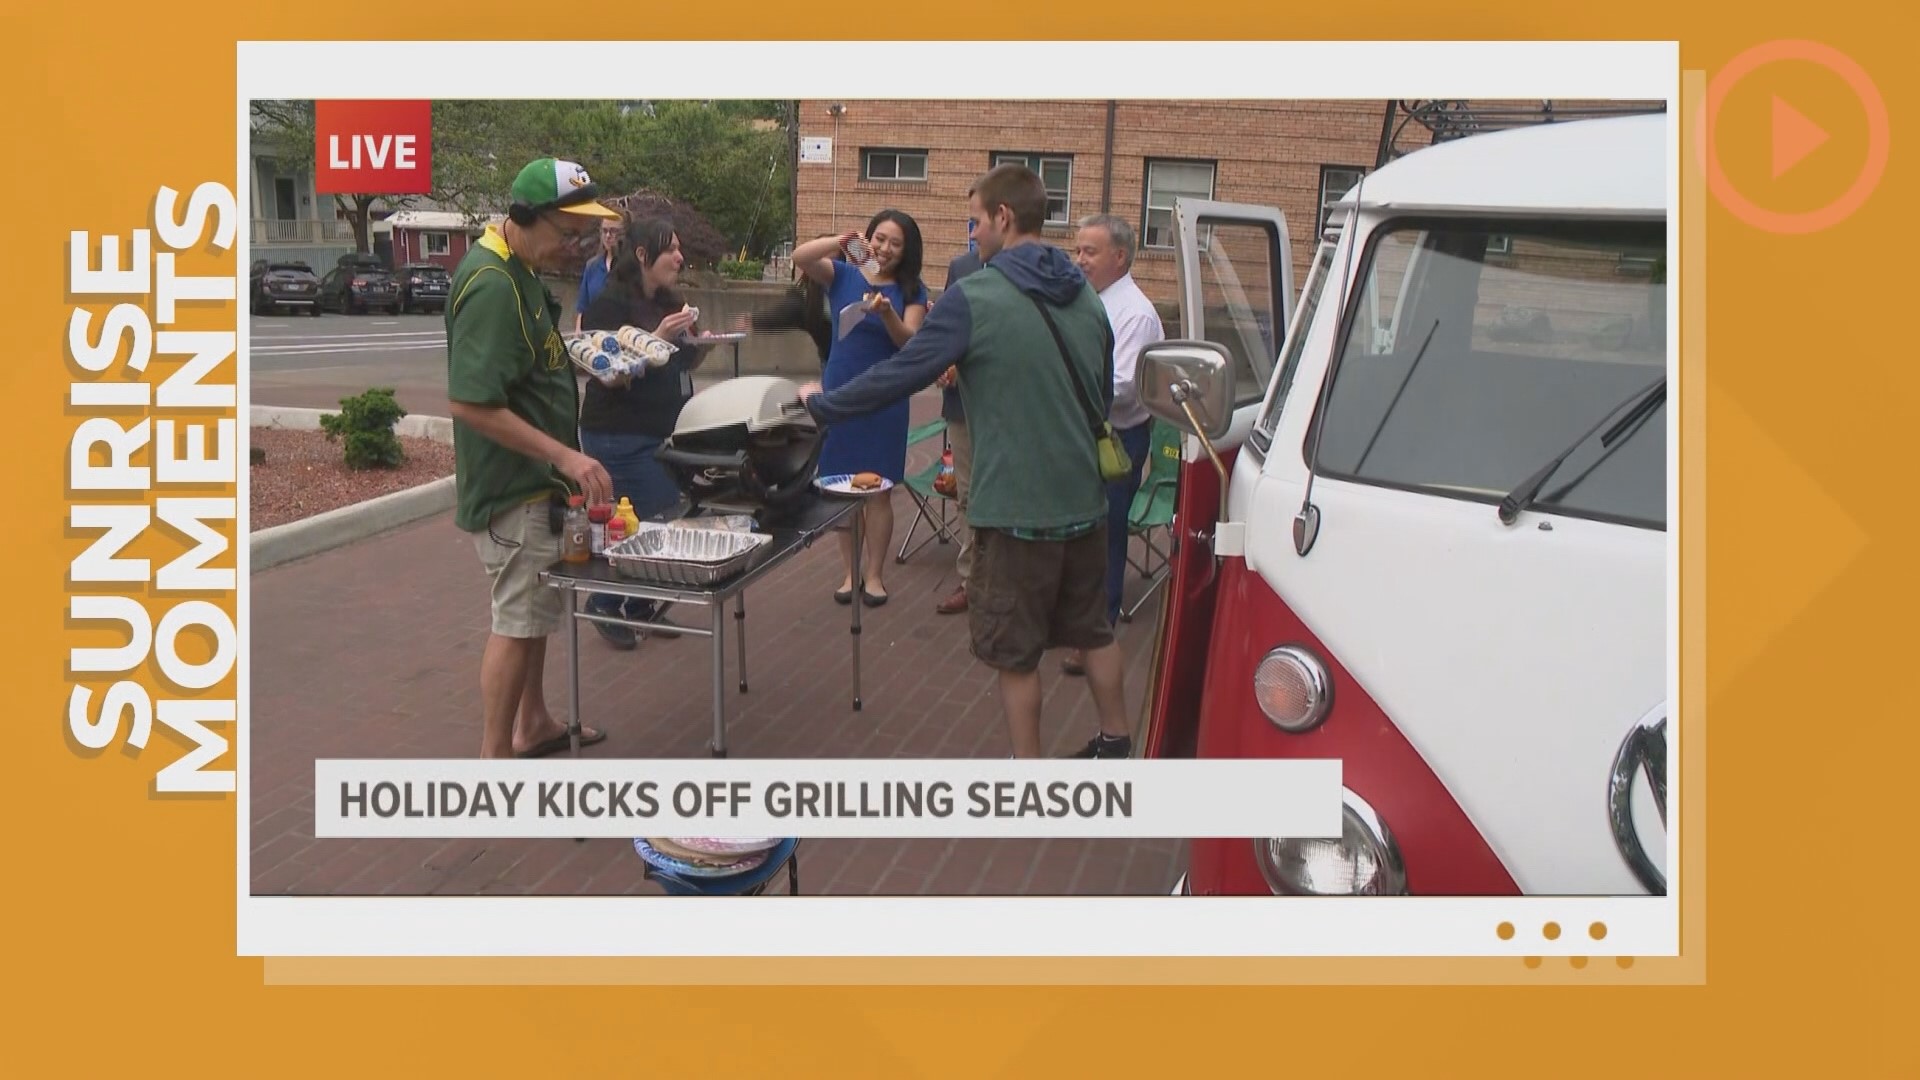 KGW Sunrise looks back at some of the lighter moments of the week, including grilling outside the studio and celebrating Voodoo Doughnut's 20-year anniversary.